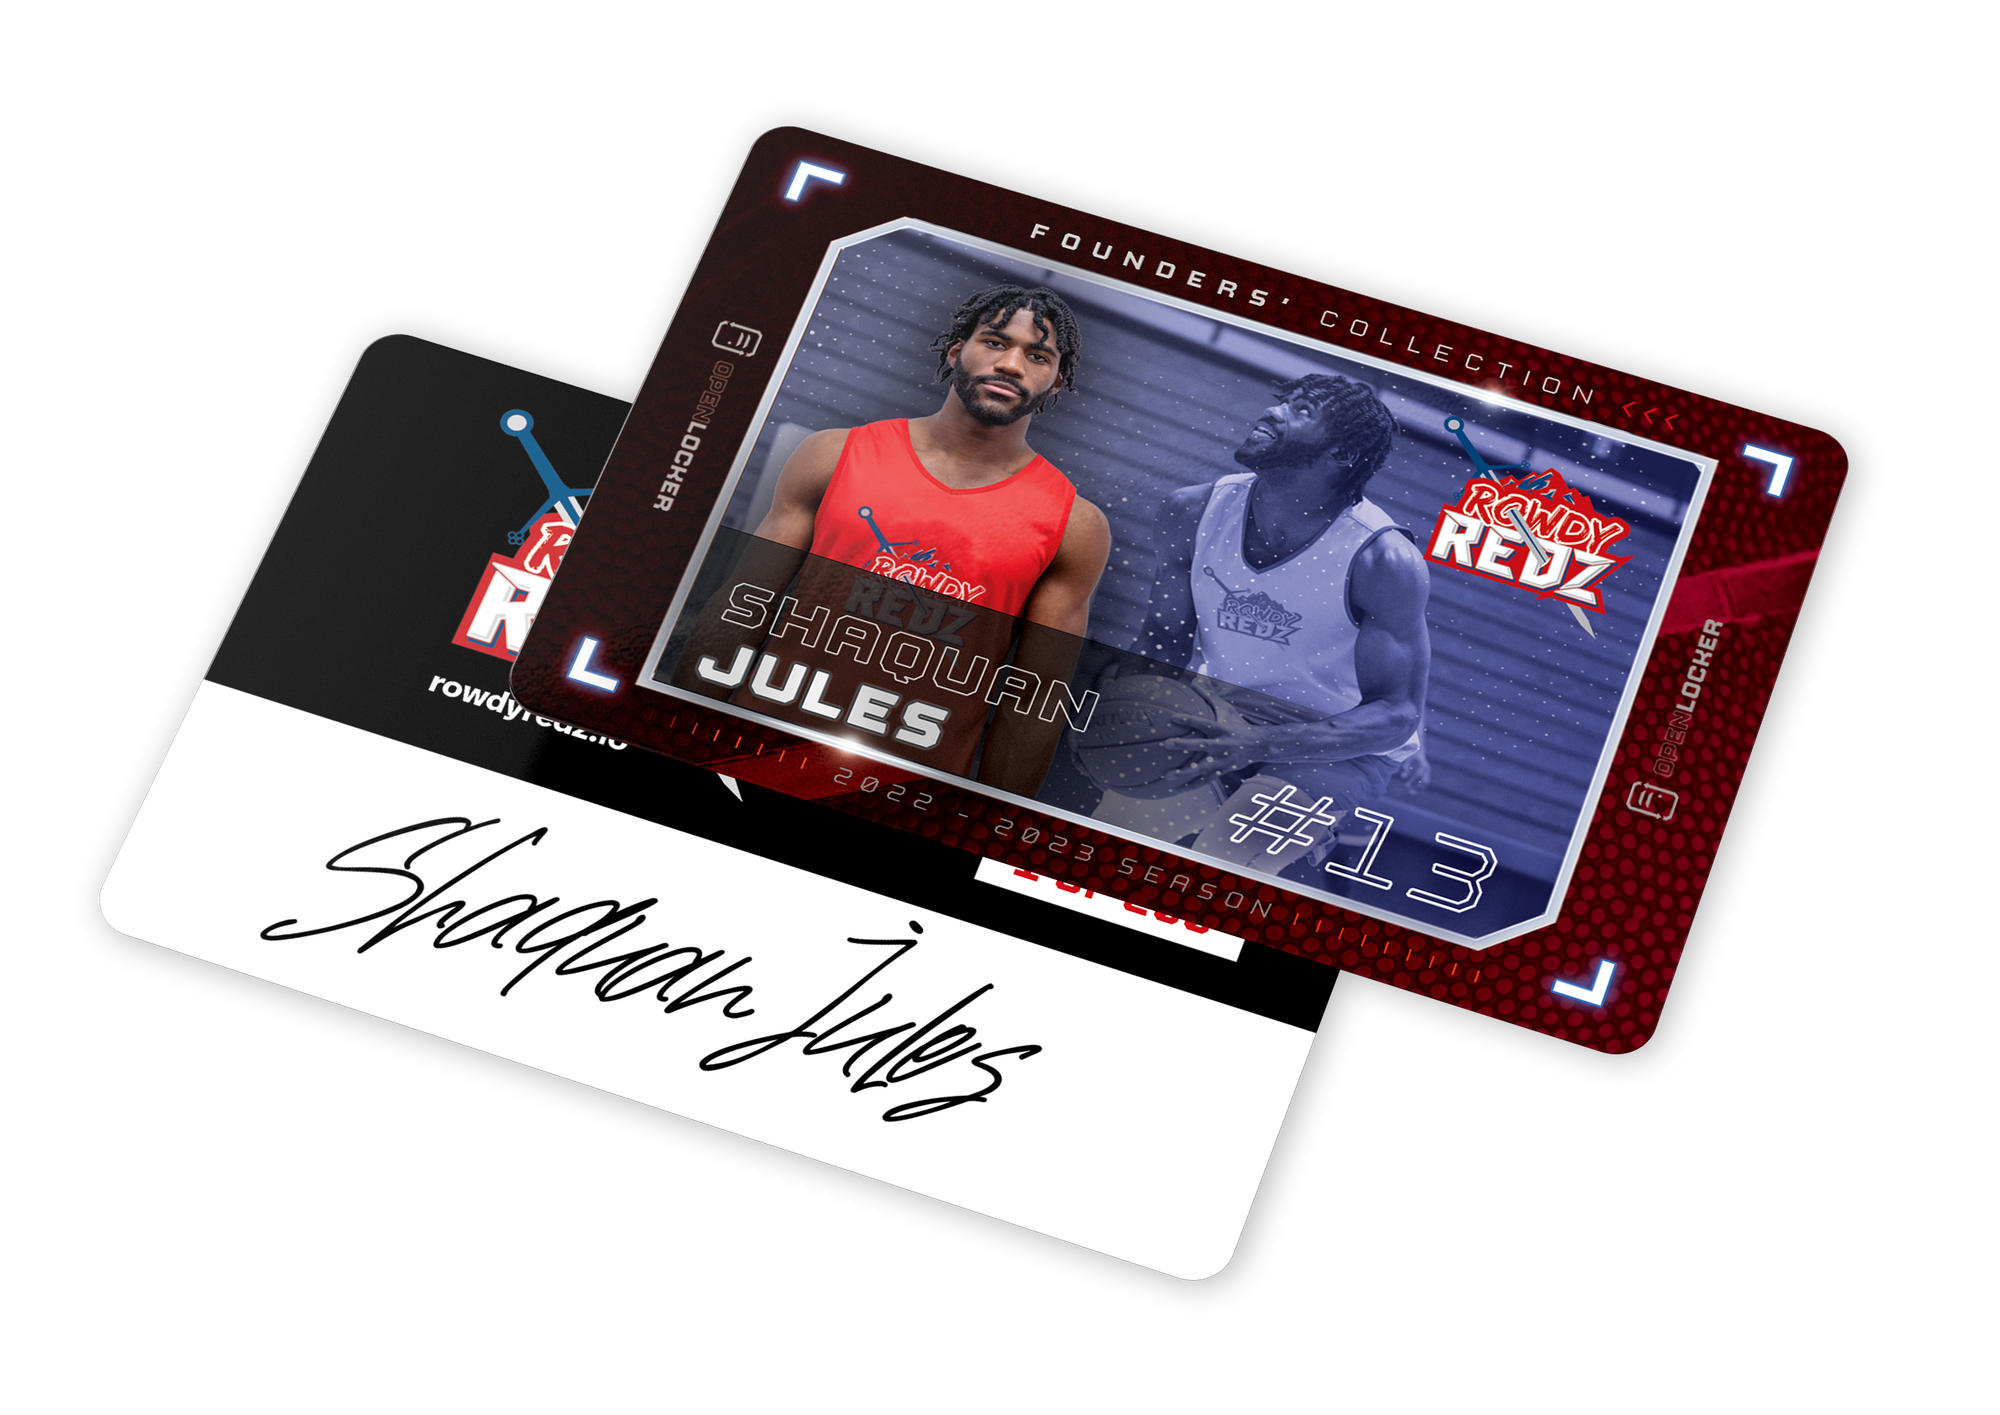 Rowdy Redz Basketball Collection Autographed Physical Card: Shaquan Jules